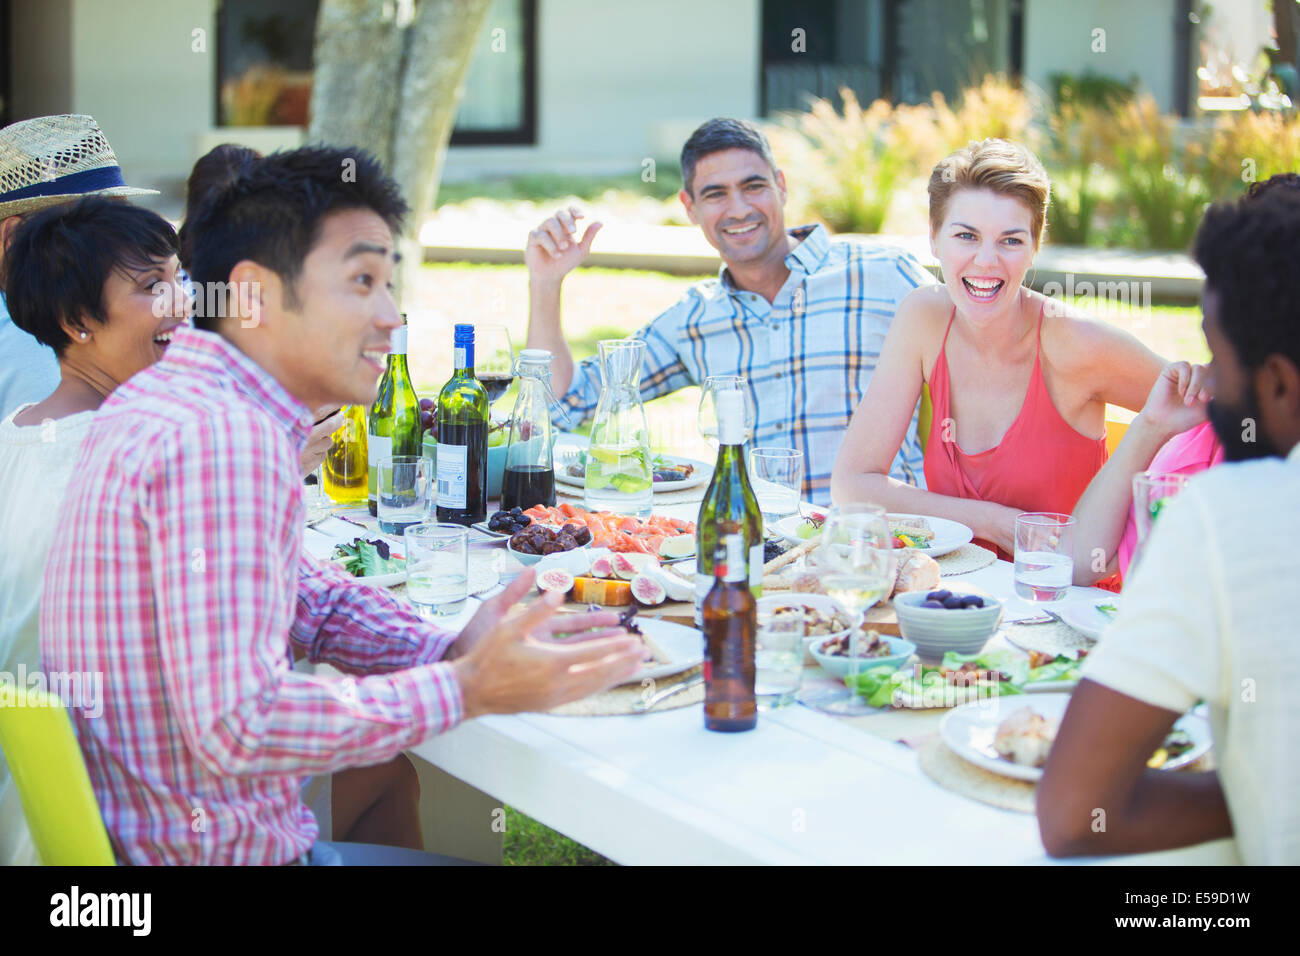 Friends talking at table outdoors Stock Photo